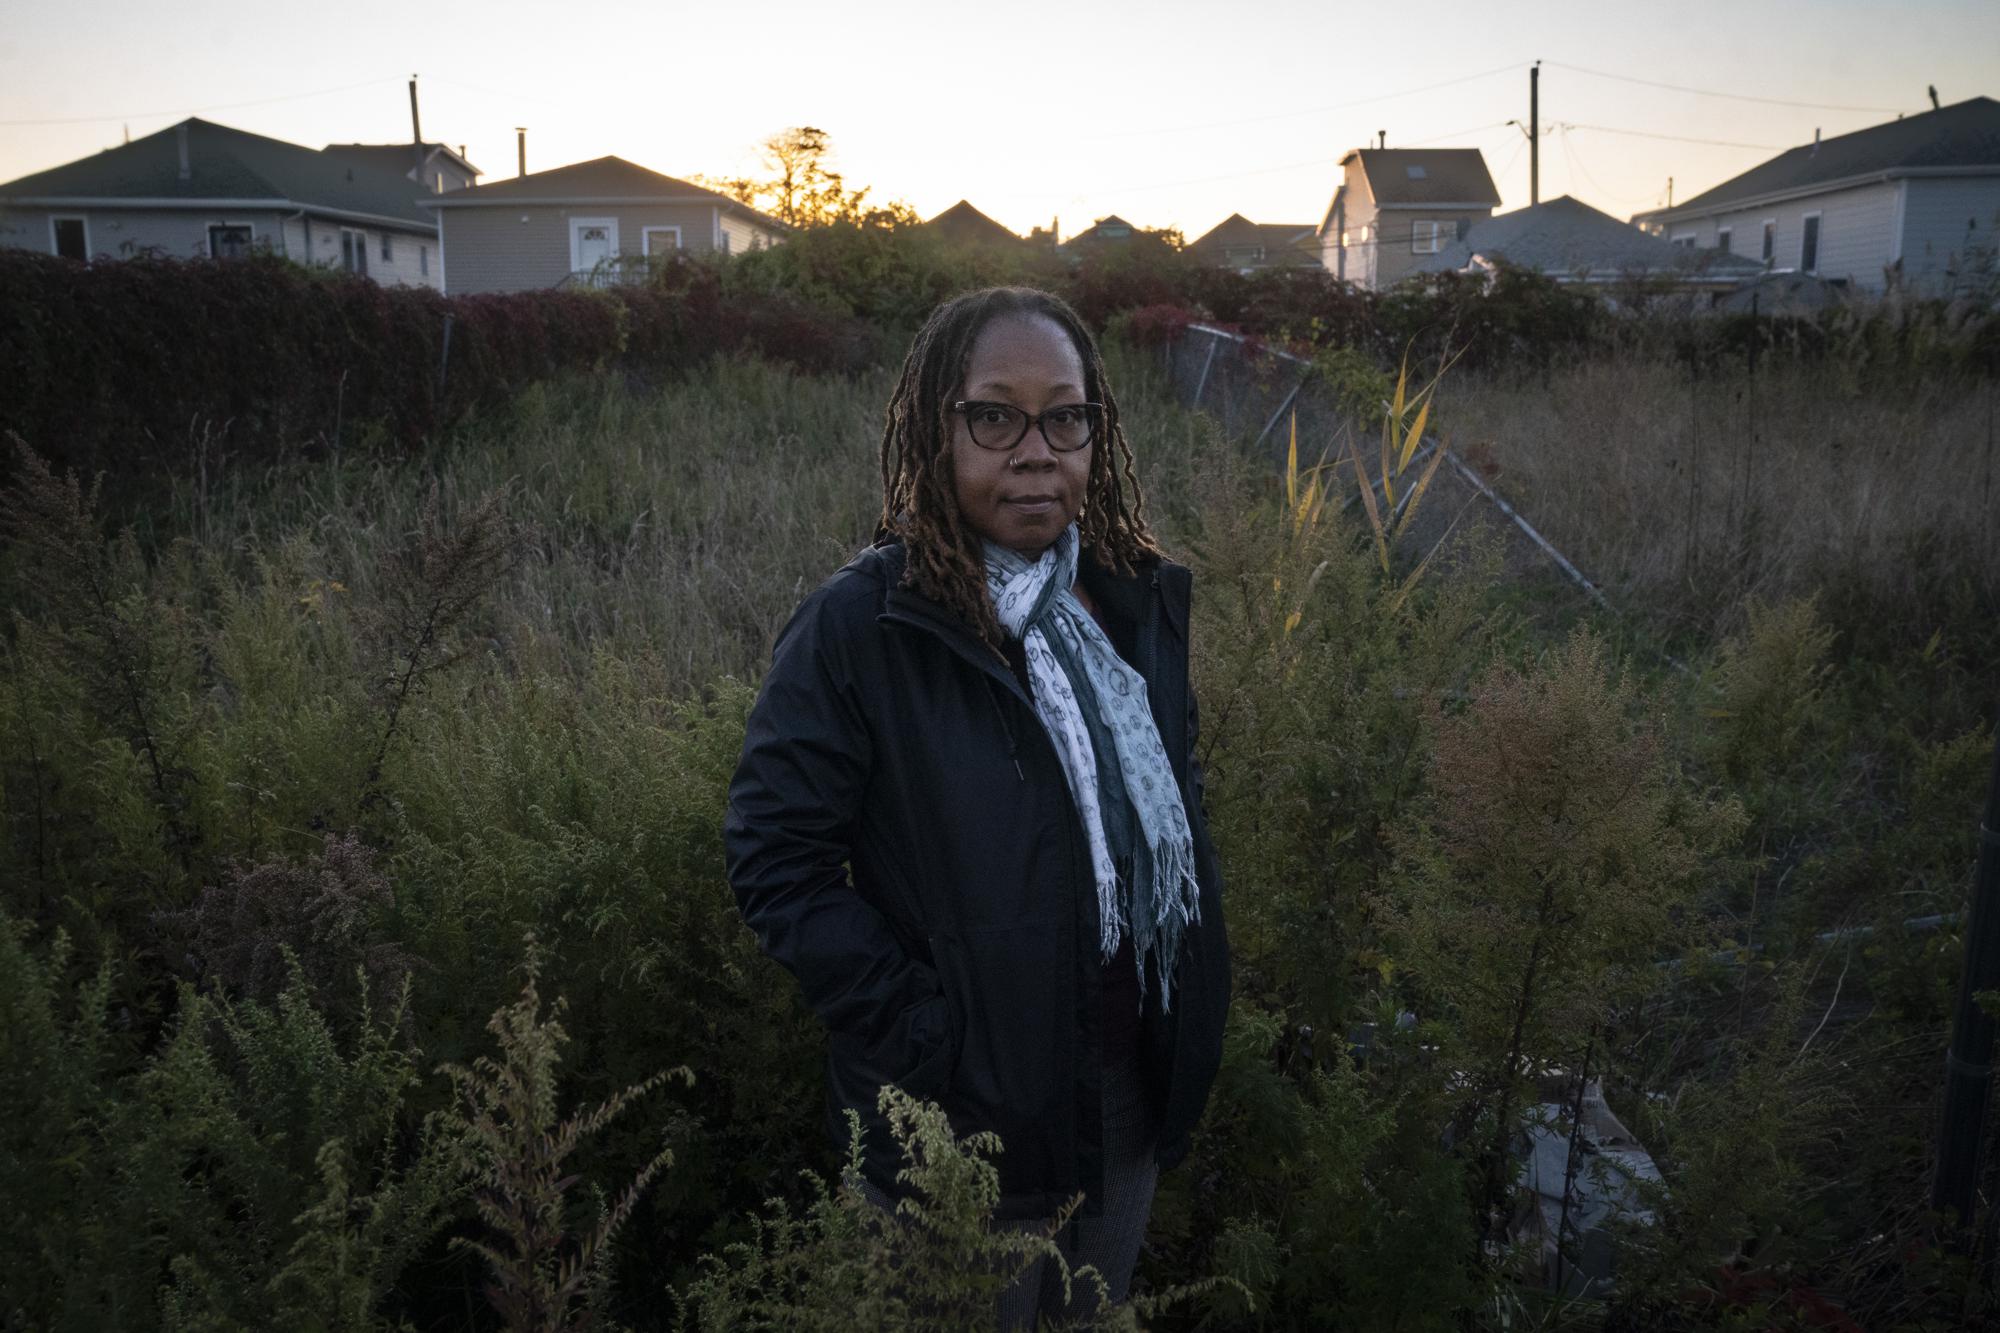 Sonia Moise, a resident of the Edgemere neighborhood, stands by an overgrown empty lot on a residential street damaged by Superstorm Sandy, Thursday, Oct. 20, 2022, in the Queens borough of New York. "They tell me that we're one peninsula — no we're not. It's a tale of two peninsulas," said Edgemere resident Moise, whose home filled with seawater during Sandy, her car carried off by the tide. (AP Photo/John Minchillo)